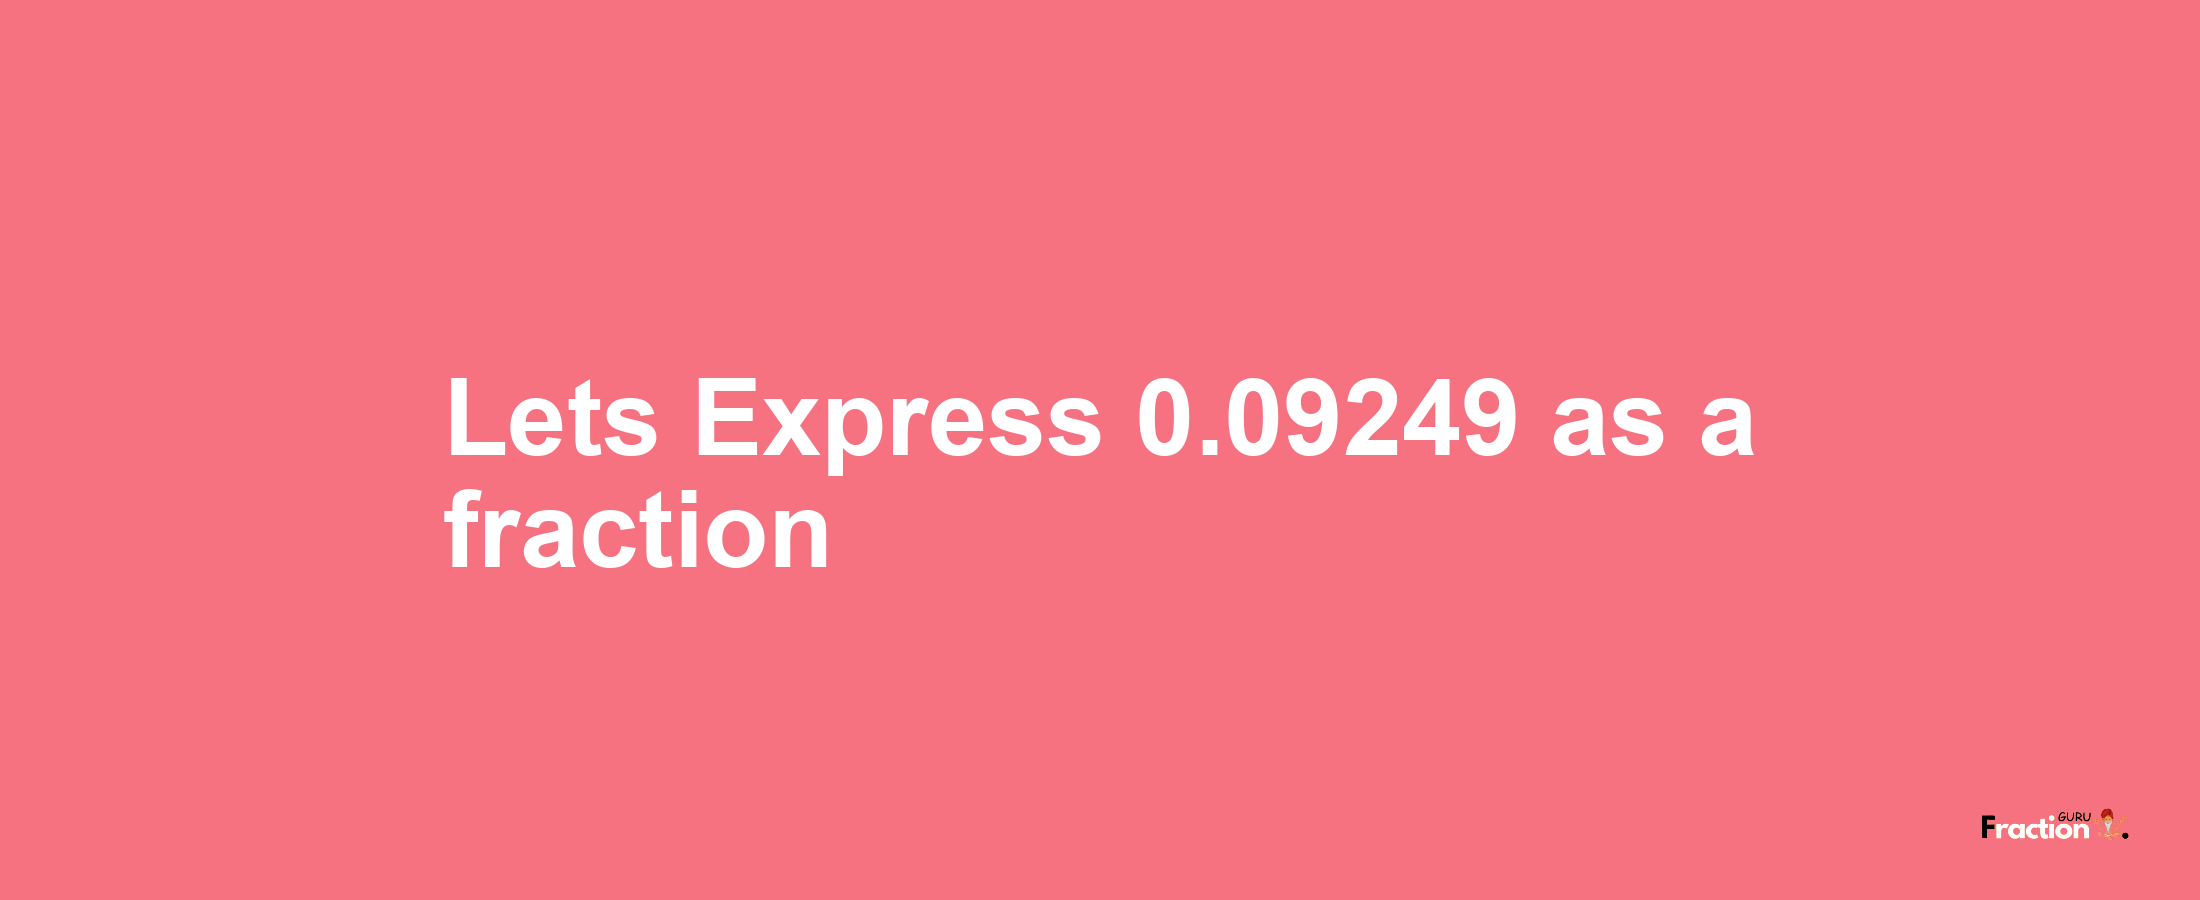 Lets Express 0.09249 as afraction